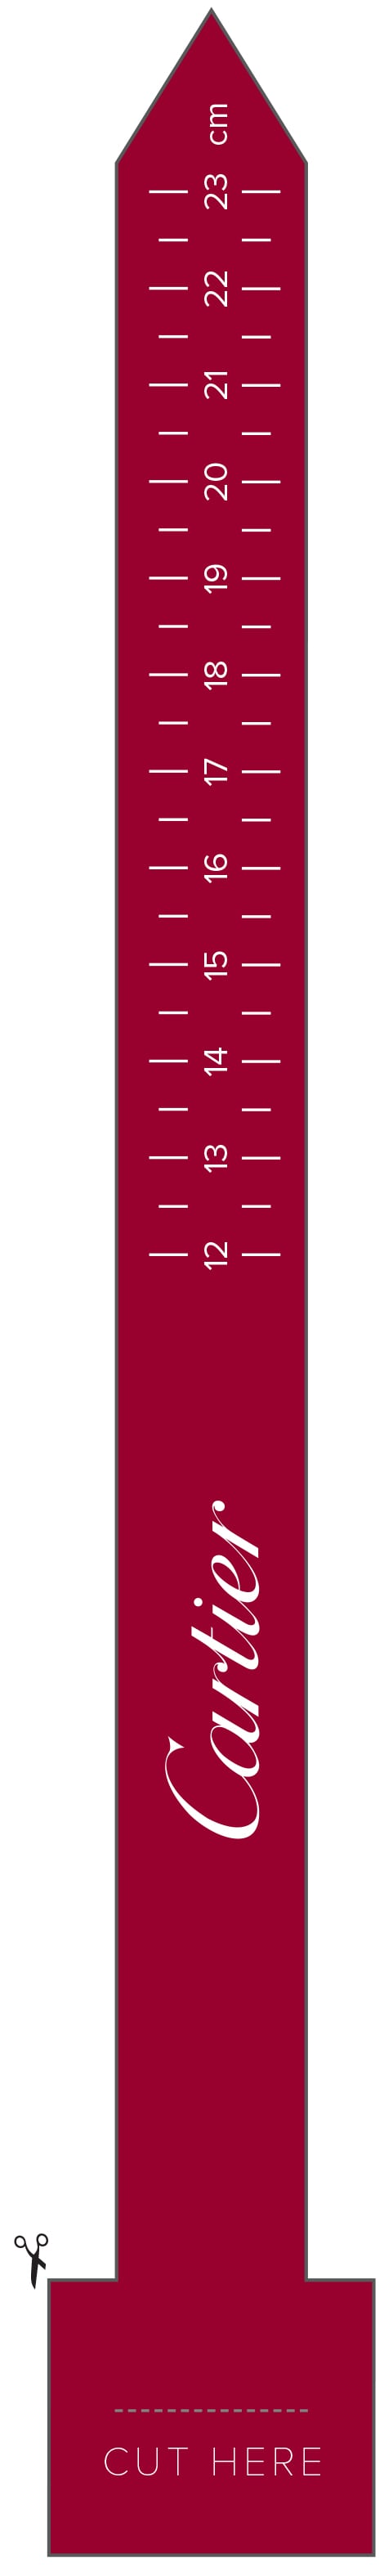 Download and print the ruler to cut out